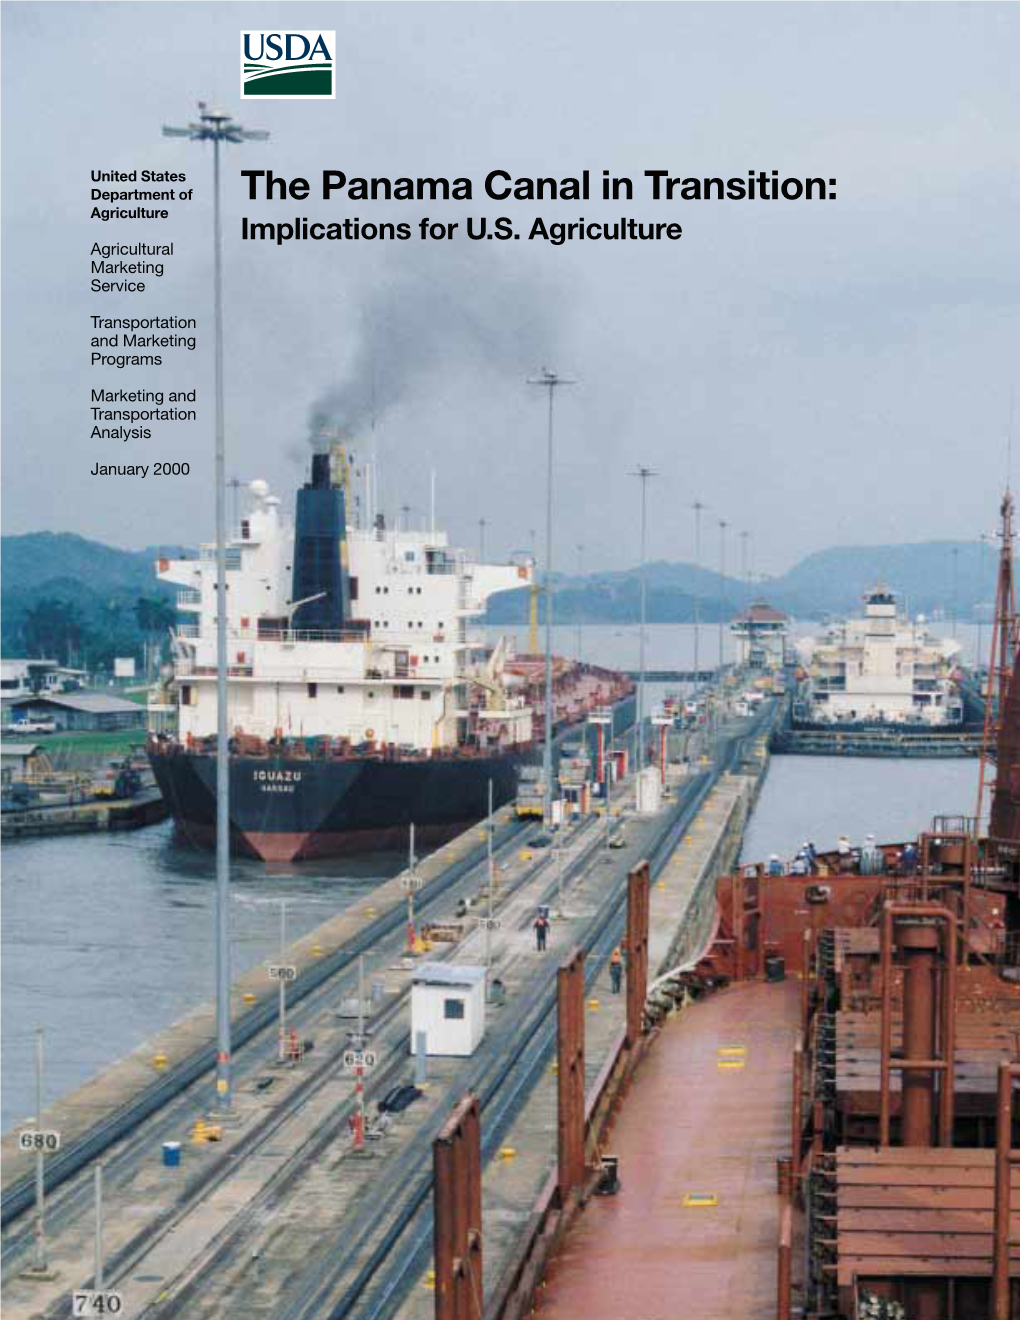 The Panama Canal in Transition: Agriculture Implications for U.S